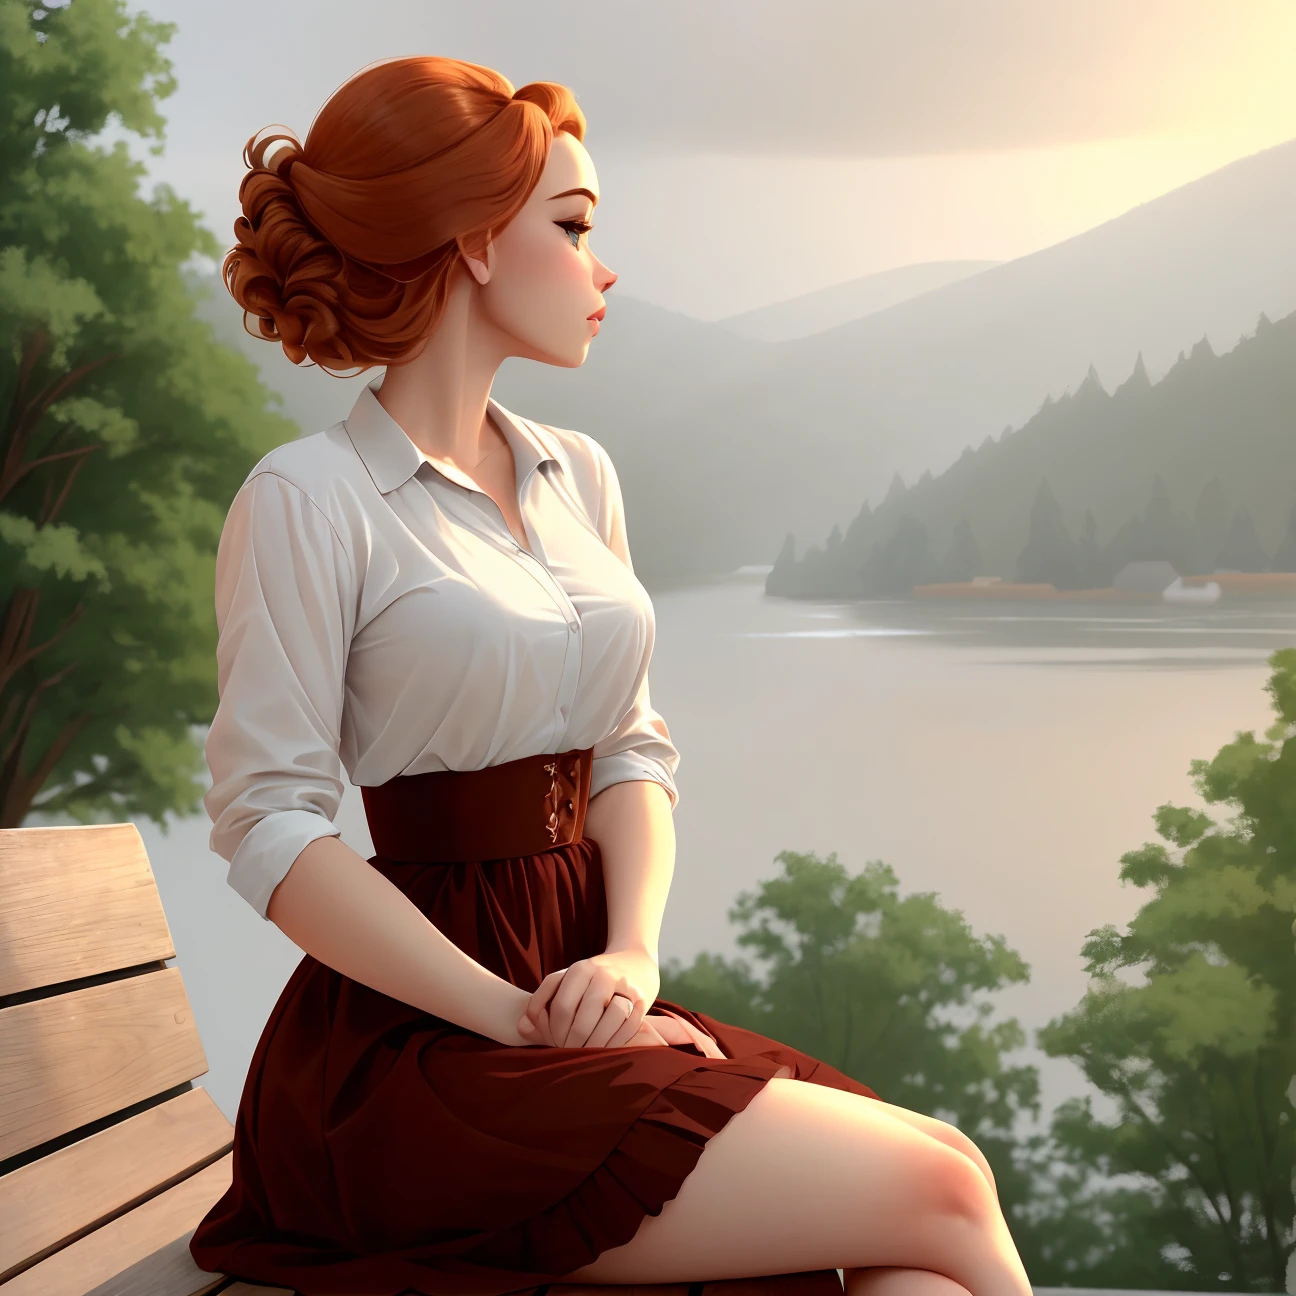 Nostalgic, 6K, photo shot from a medium distance, mid-body portrait, highly-detailed, girl sitting on a wooden bench, wearing a vintage-style dress with a full skirt and petticoats, lost in thought, curly red hair styled in a beehive, [Kate Winslet|Mila Kunis], set against a backdrop of a misty, overcast sky with a subtle, muted color palette and gentle, diffuse lighting